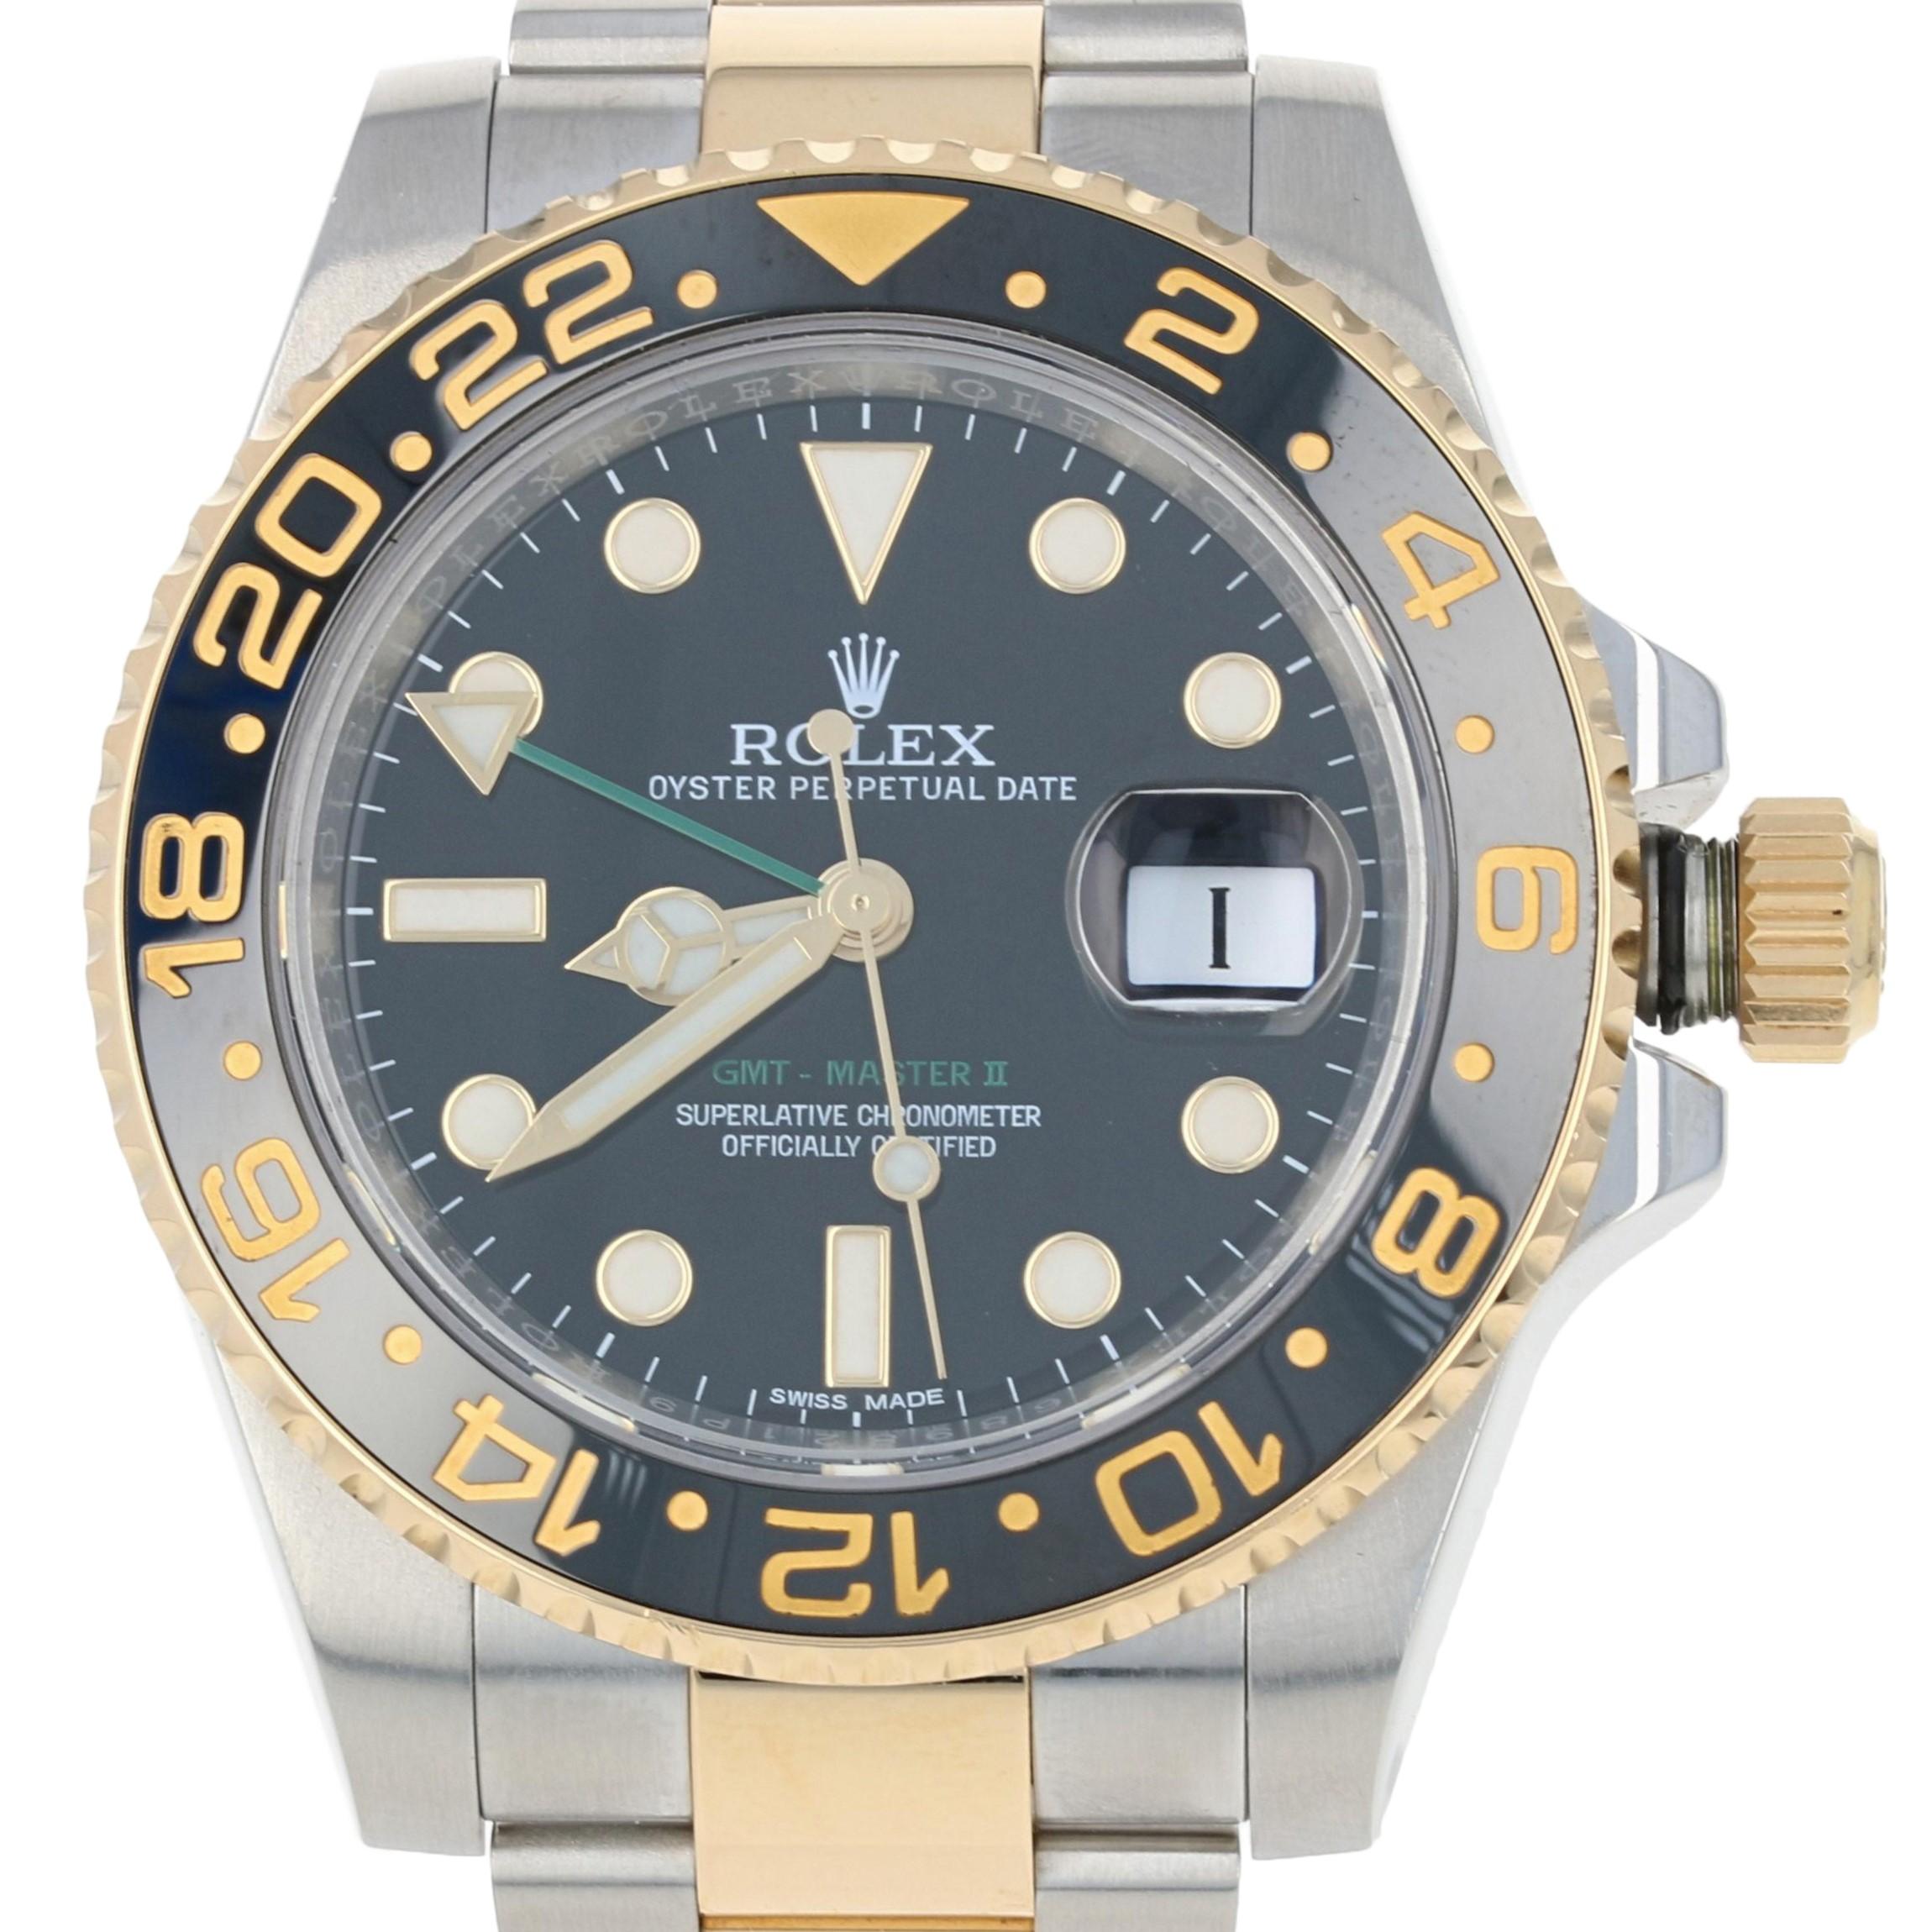 This is an authentic Rolex wristwatch. The watch has been professionally serviced and comes with a two-year warranty along with the Rolex boxes, papers, and an additional link.

Brand: Rolex GMT-Master II
Model Number: 116713
Materials: Stainless